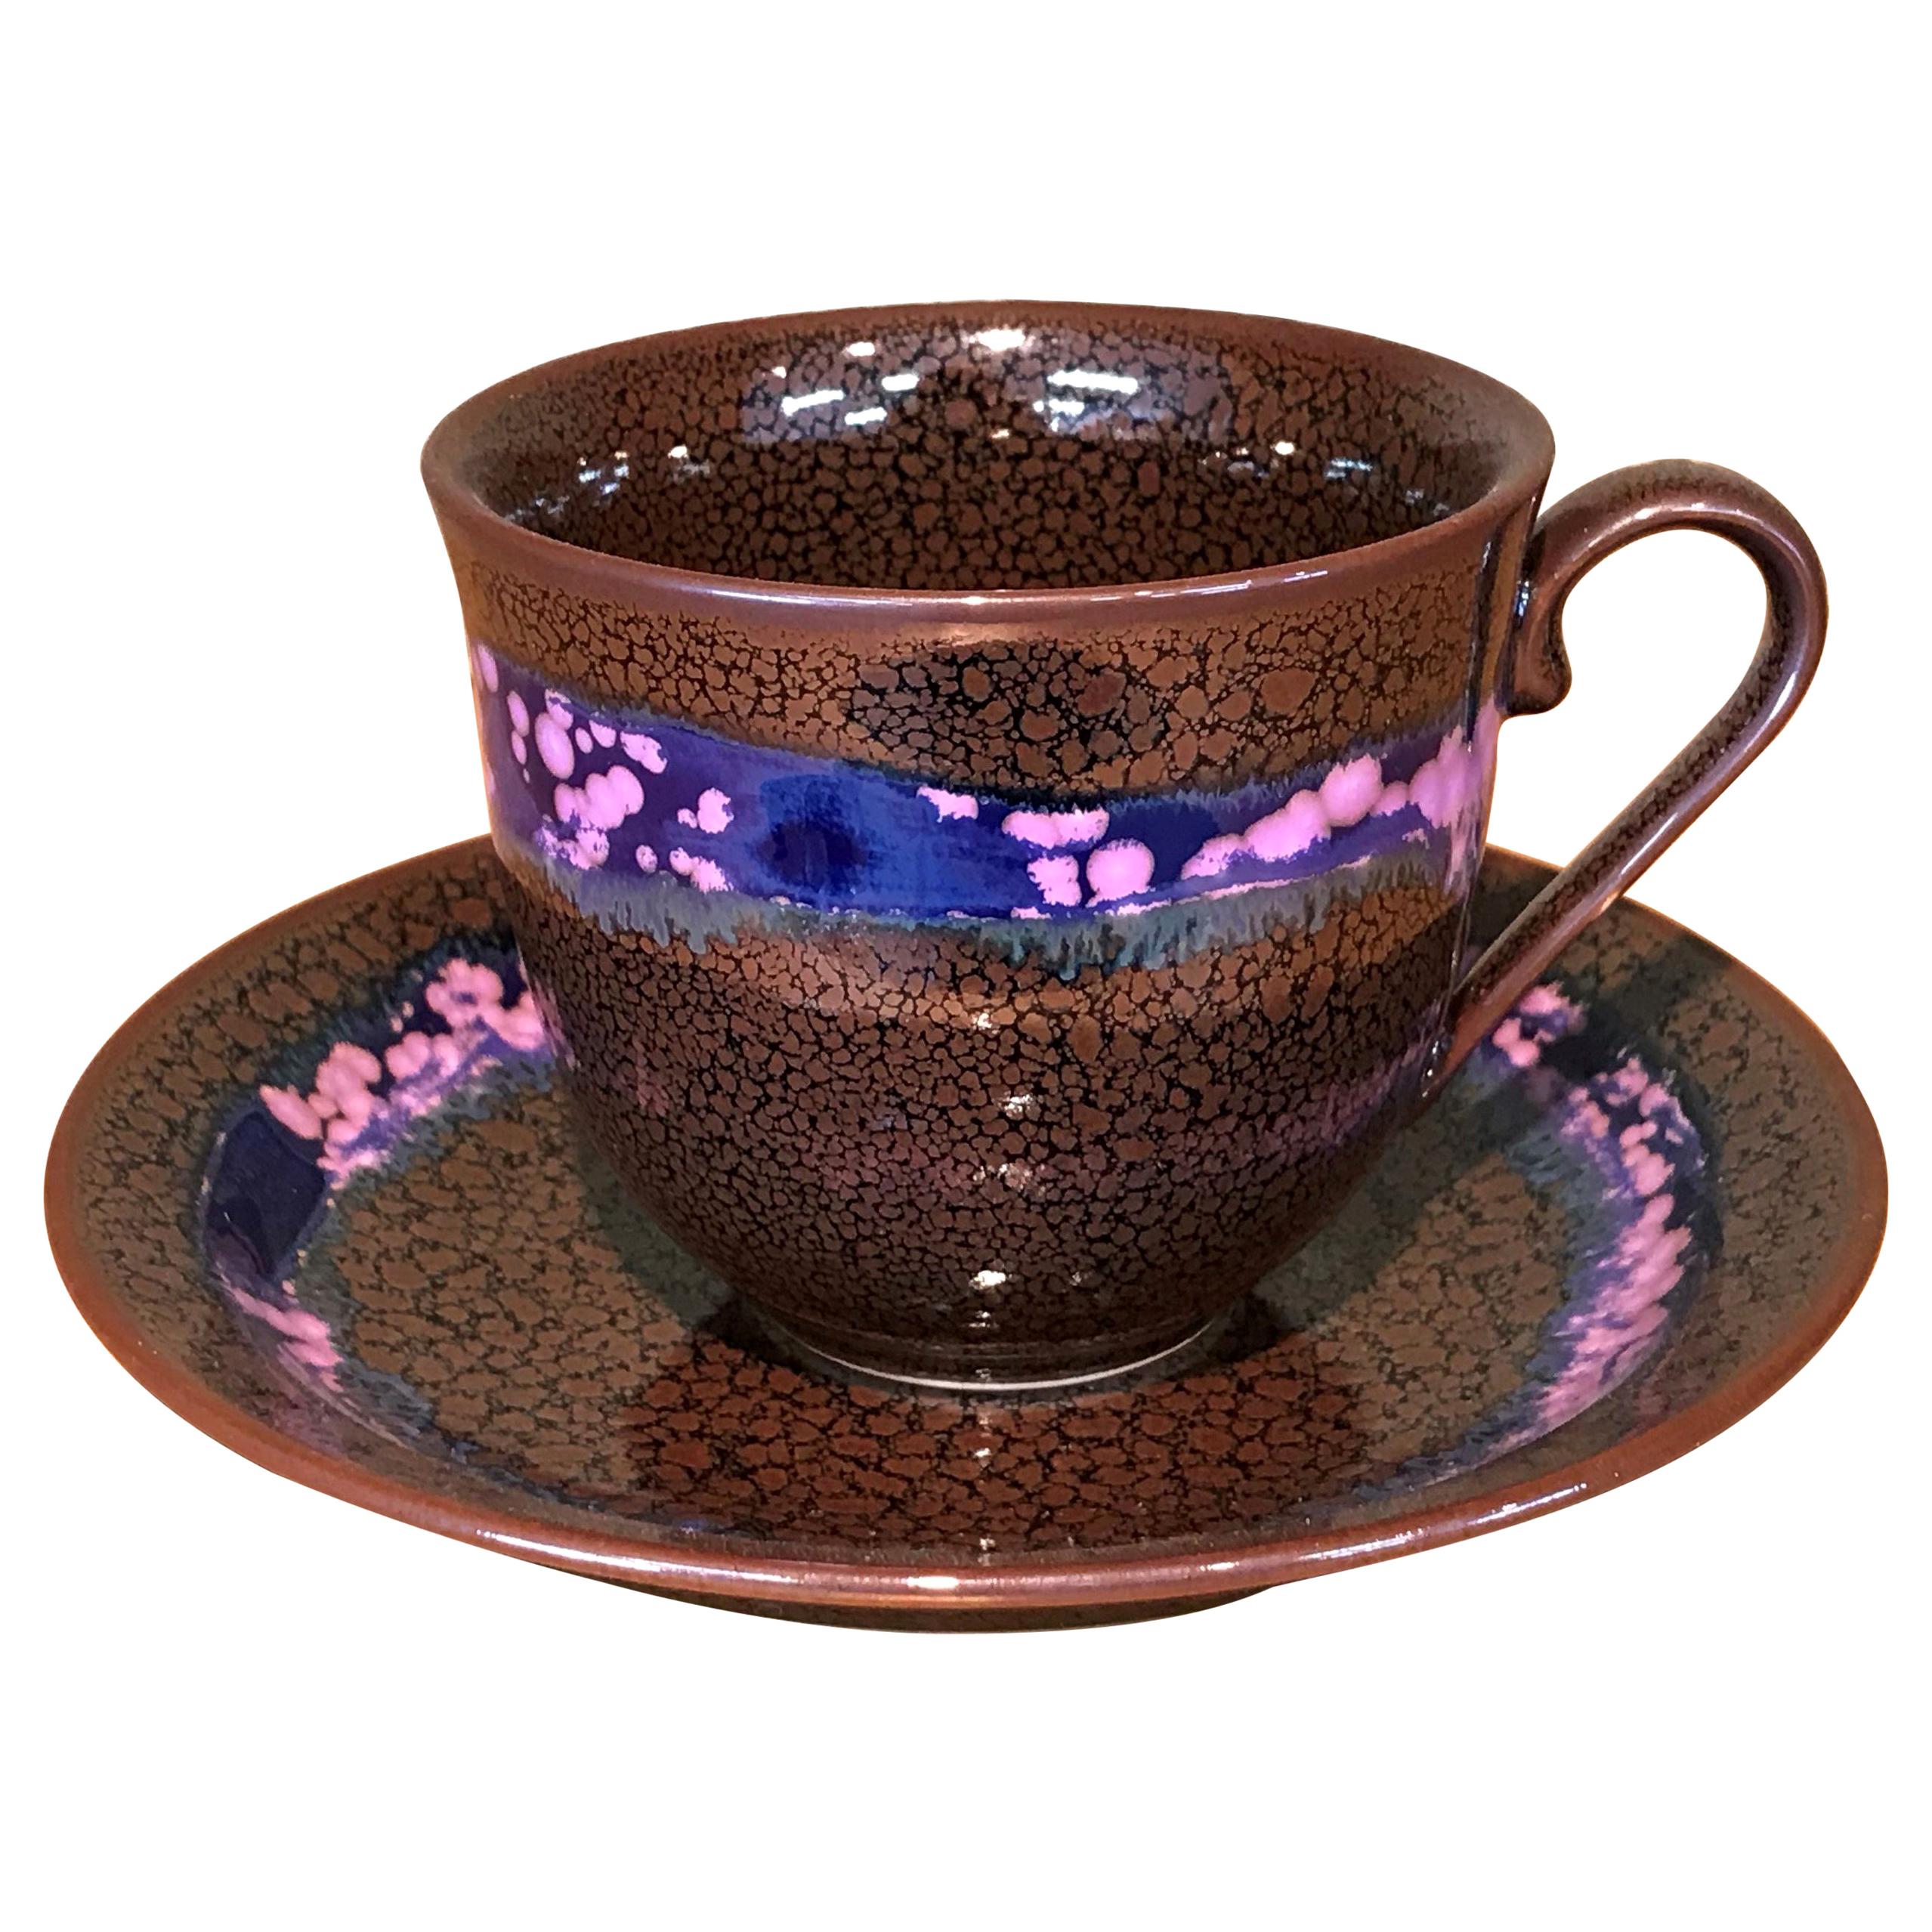 Brown Blue Hand-Glazed Porcelain Cup and Saucer by Japanese Master Artist